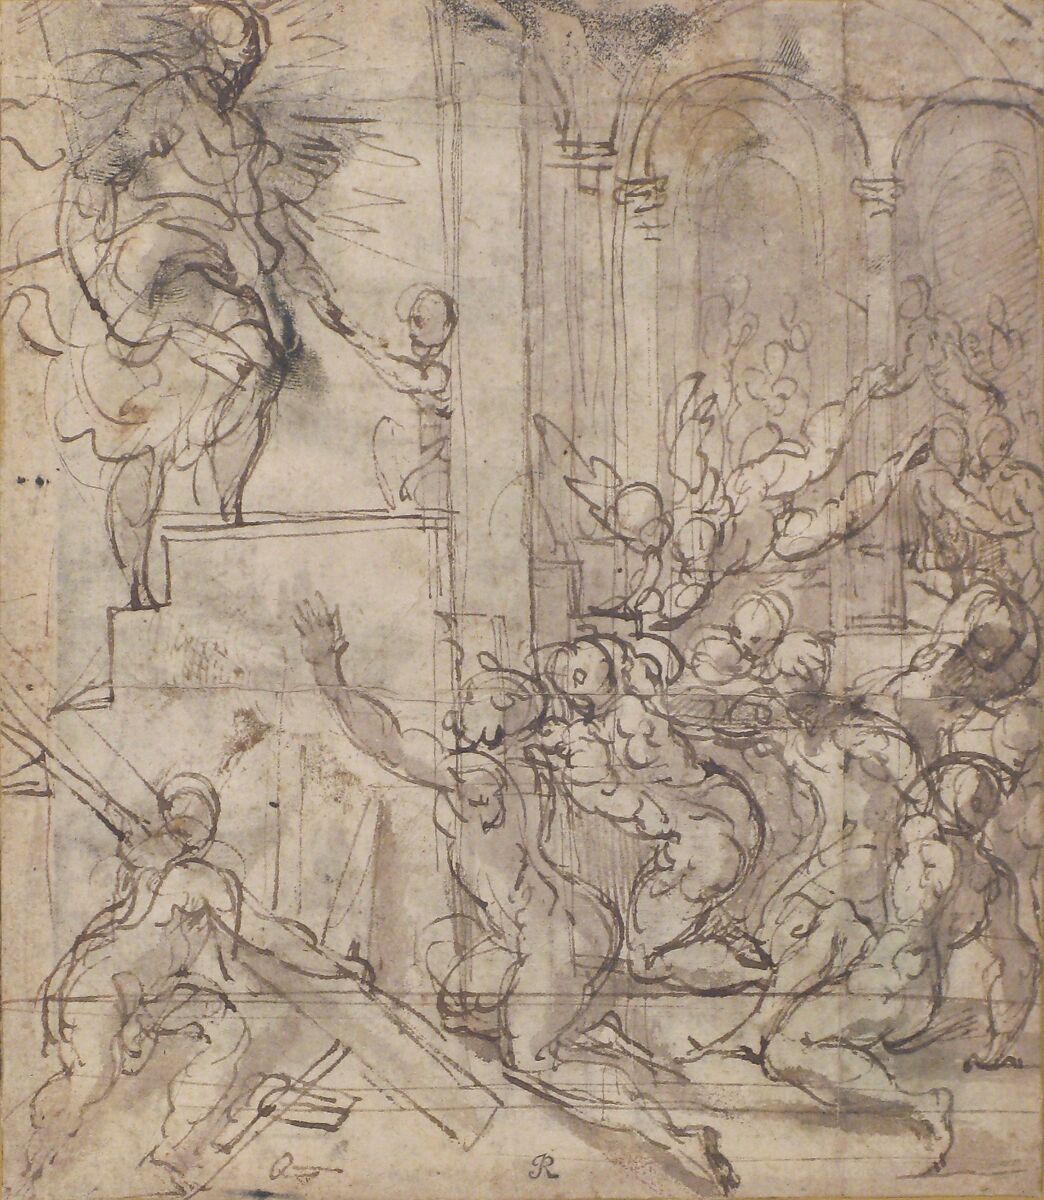 Apparition of Christ (recto); Printed Fragment with Jupiter Enthroned with Eagle, from Caraglio's "Martyrdom of Saint Peter and Saint Paul" (verso), Parmigianino (Girolamo Francesco Maria Mazzola) (Italian, Parma 1503–1540 Casalmaggiore), Pen and brown ink, brush and gray-brown wash, over traces of leadpoint and some stylus ruling (recto); printed Jupiter enthroned with attendant eagle (verso), a proof impression of the upper right corner of Caraglio's engraving "The Martyrdom of St. Peter and St. Paul," after Parmigianino (Bartsch, XV, p. 71, no. 8) 